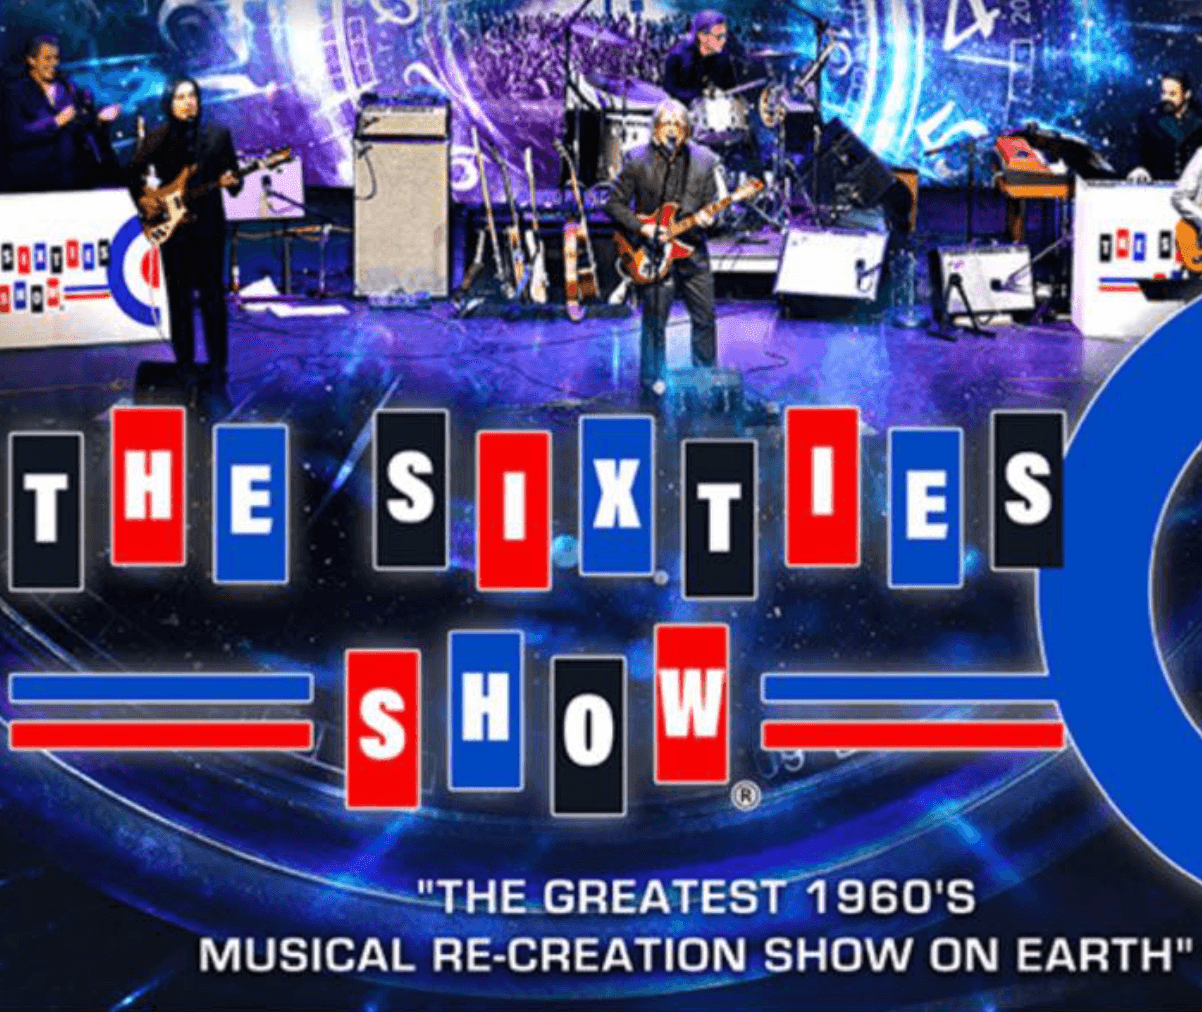 THE SIXTIES SHOW TICKETS